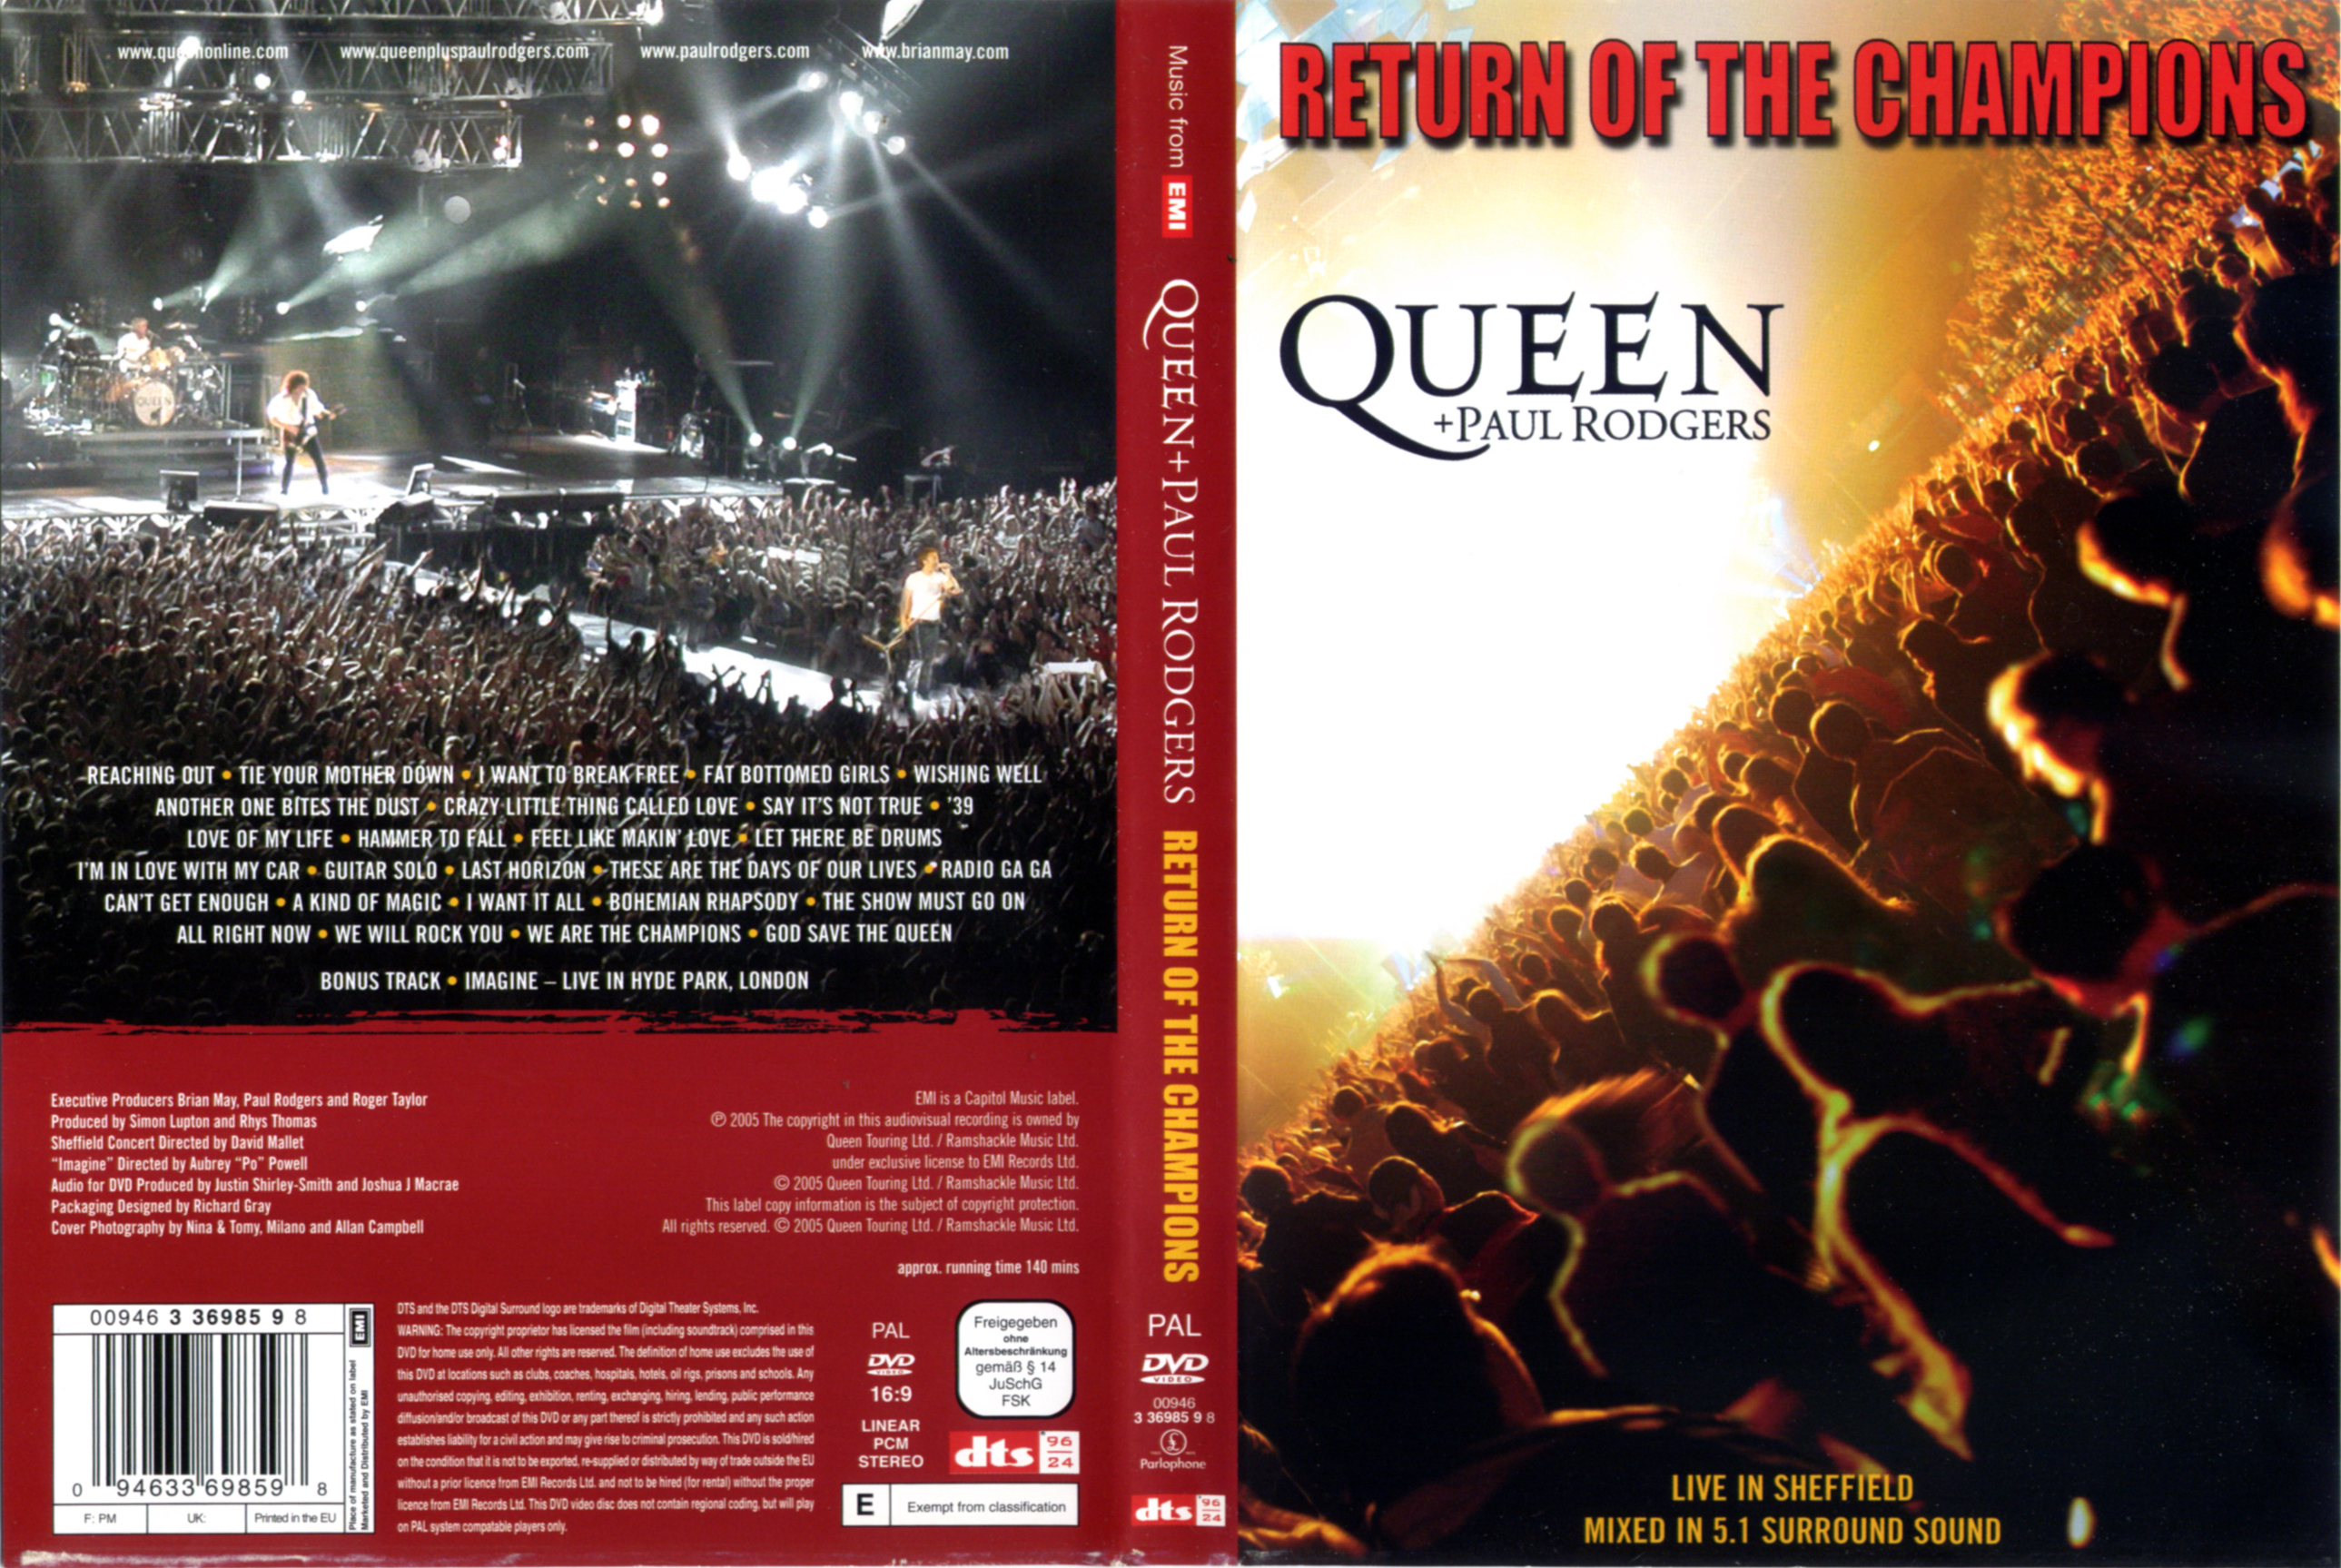 Jaquette DVD Queen + Paul Rodgers return of the champions